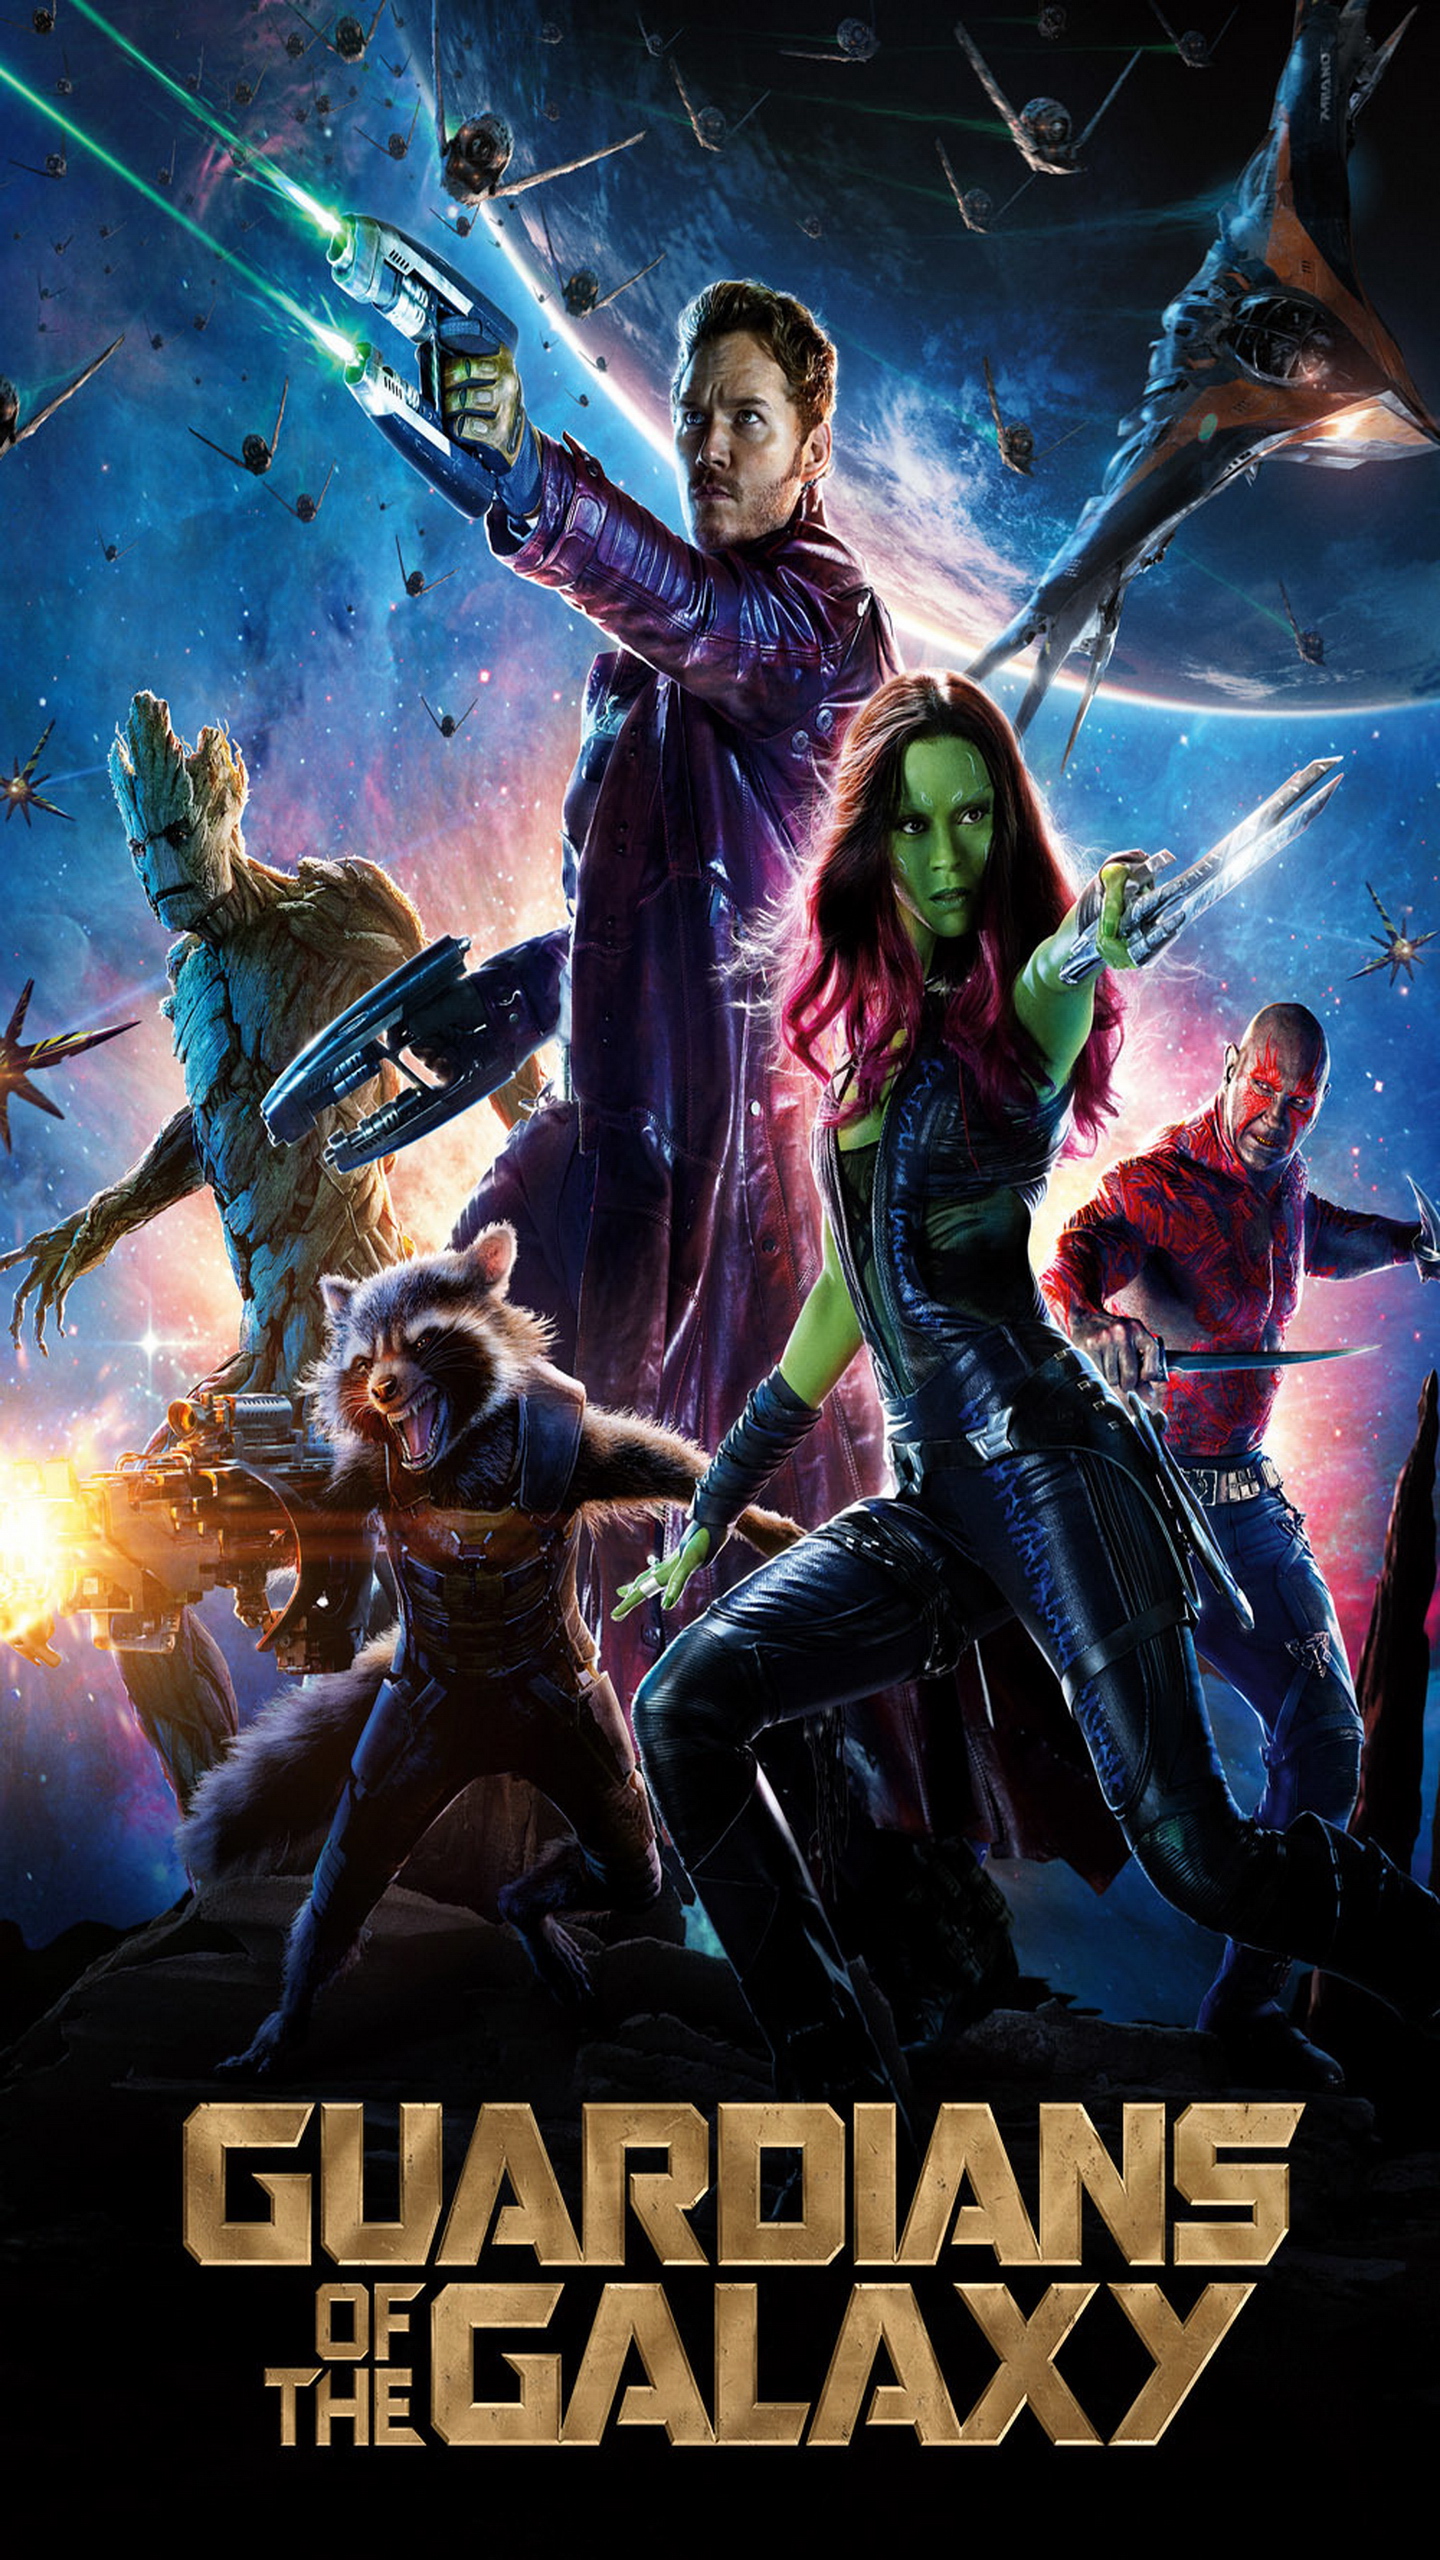 guardians of the galaxy wallpaper,movie,poster,action adventure game,games,fictional character